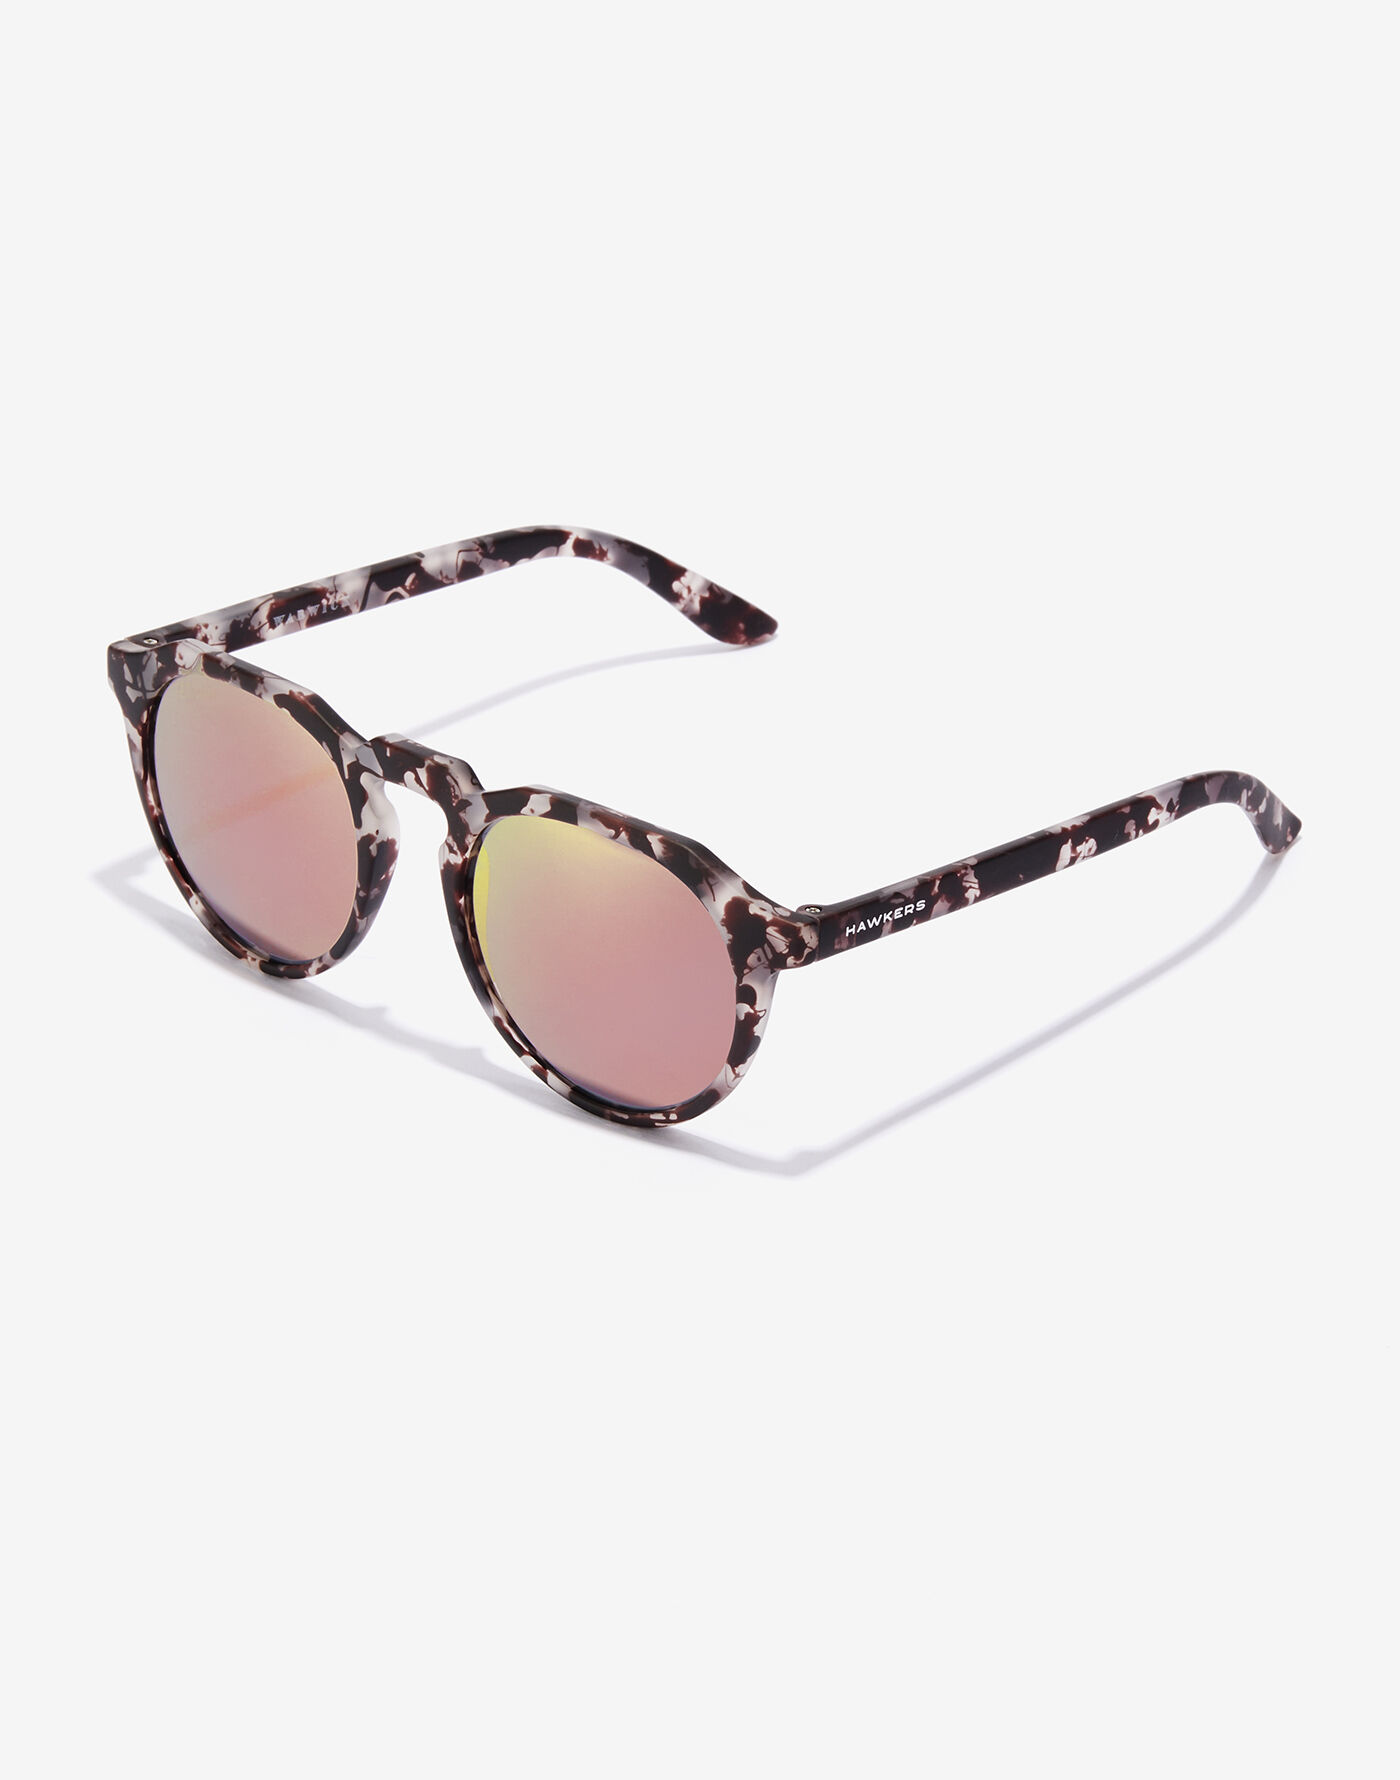 Buy Sunglasses Online | Hawkers USA® Official Store